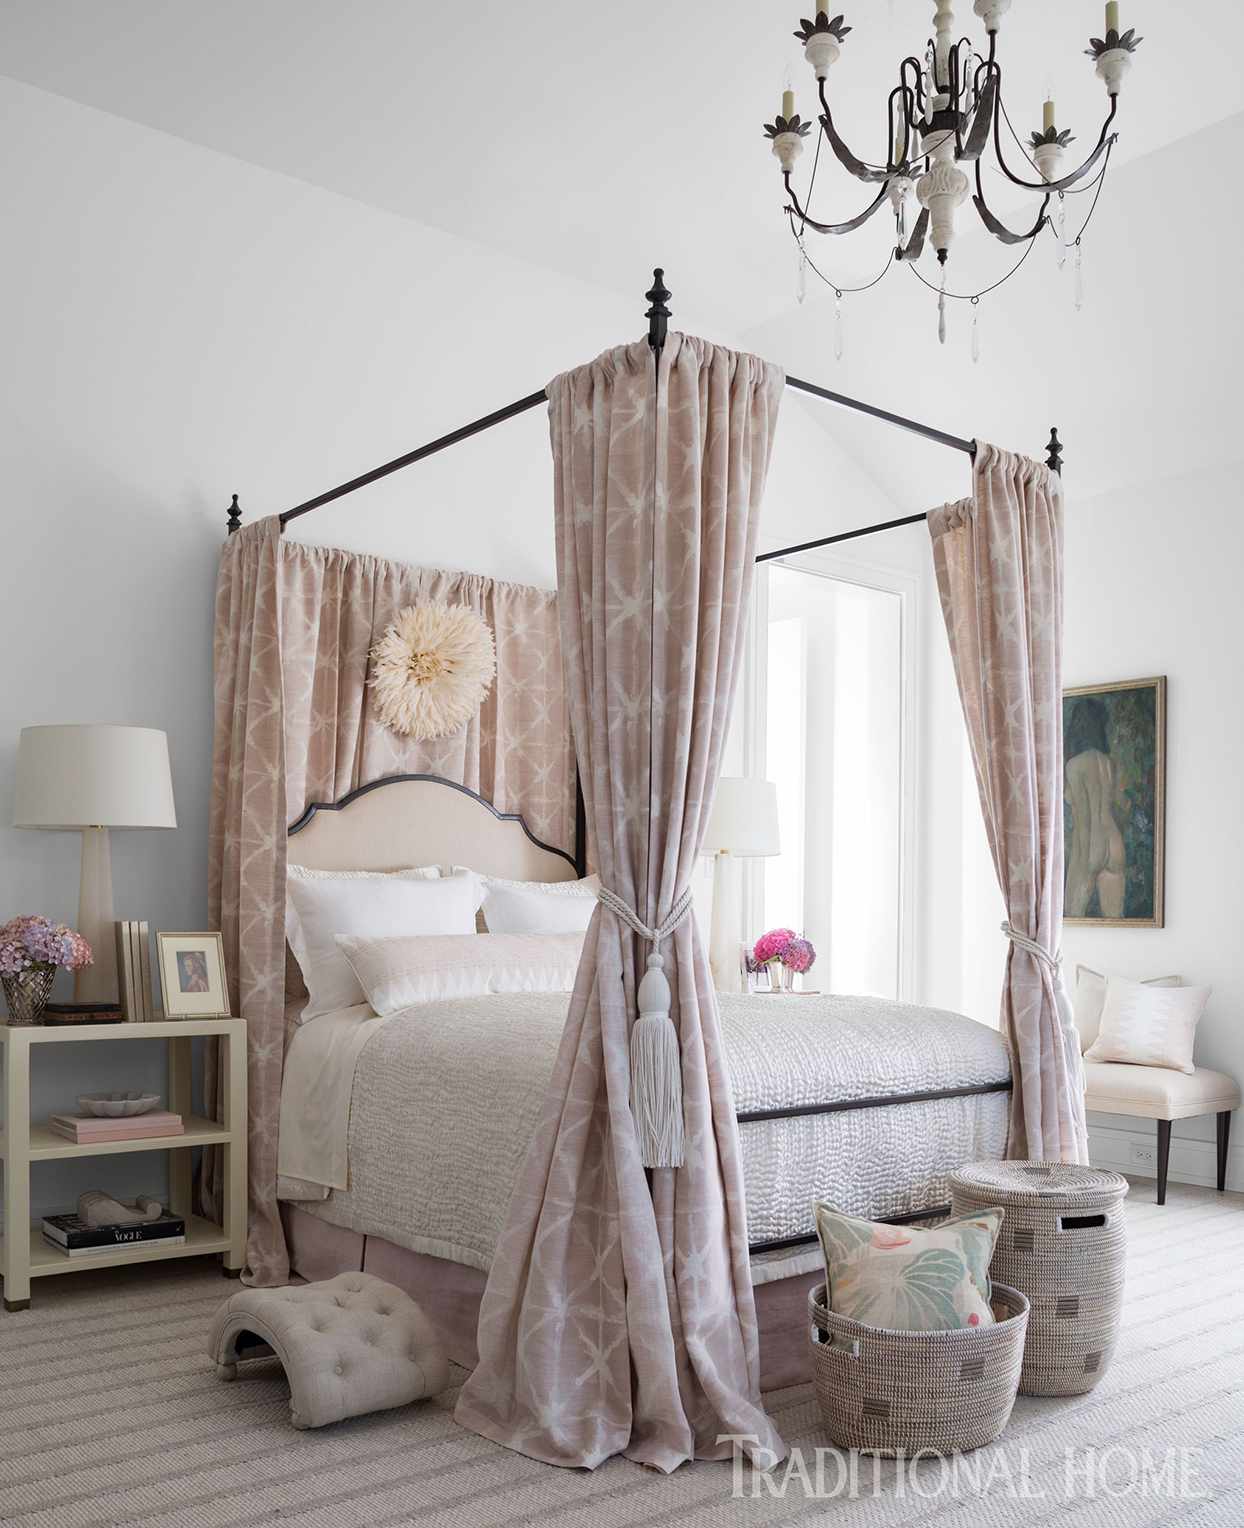 Bedroom with canopy and chandelier